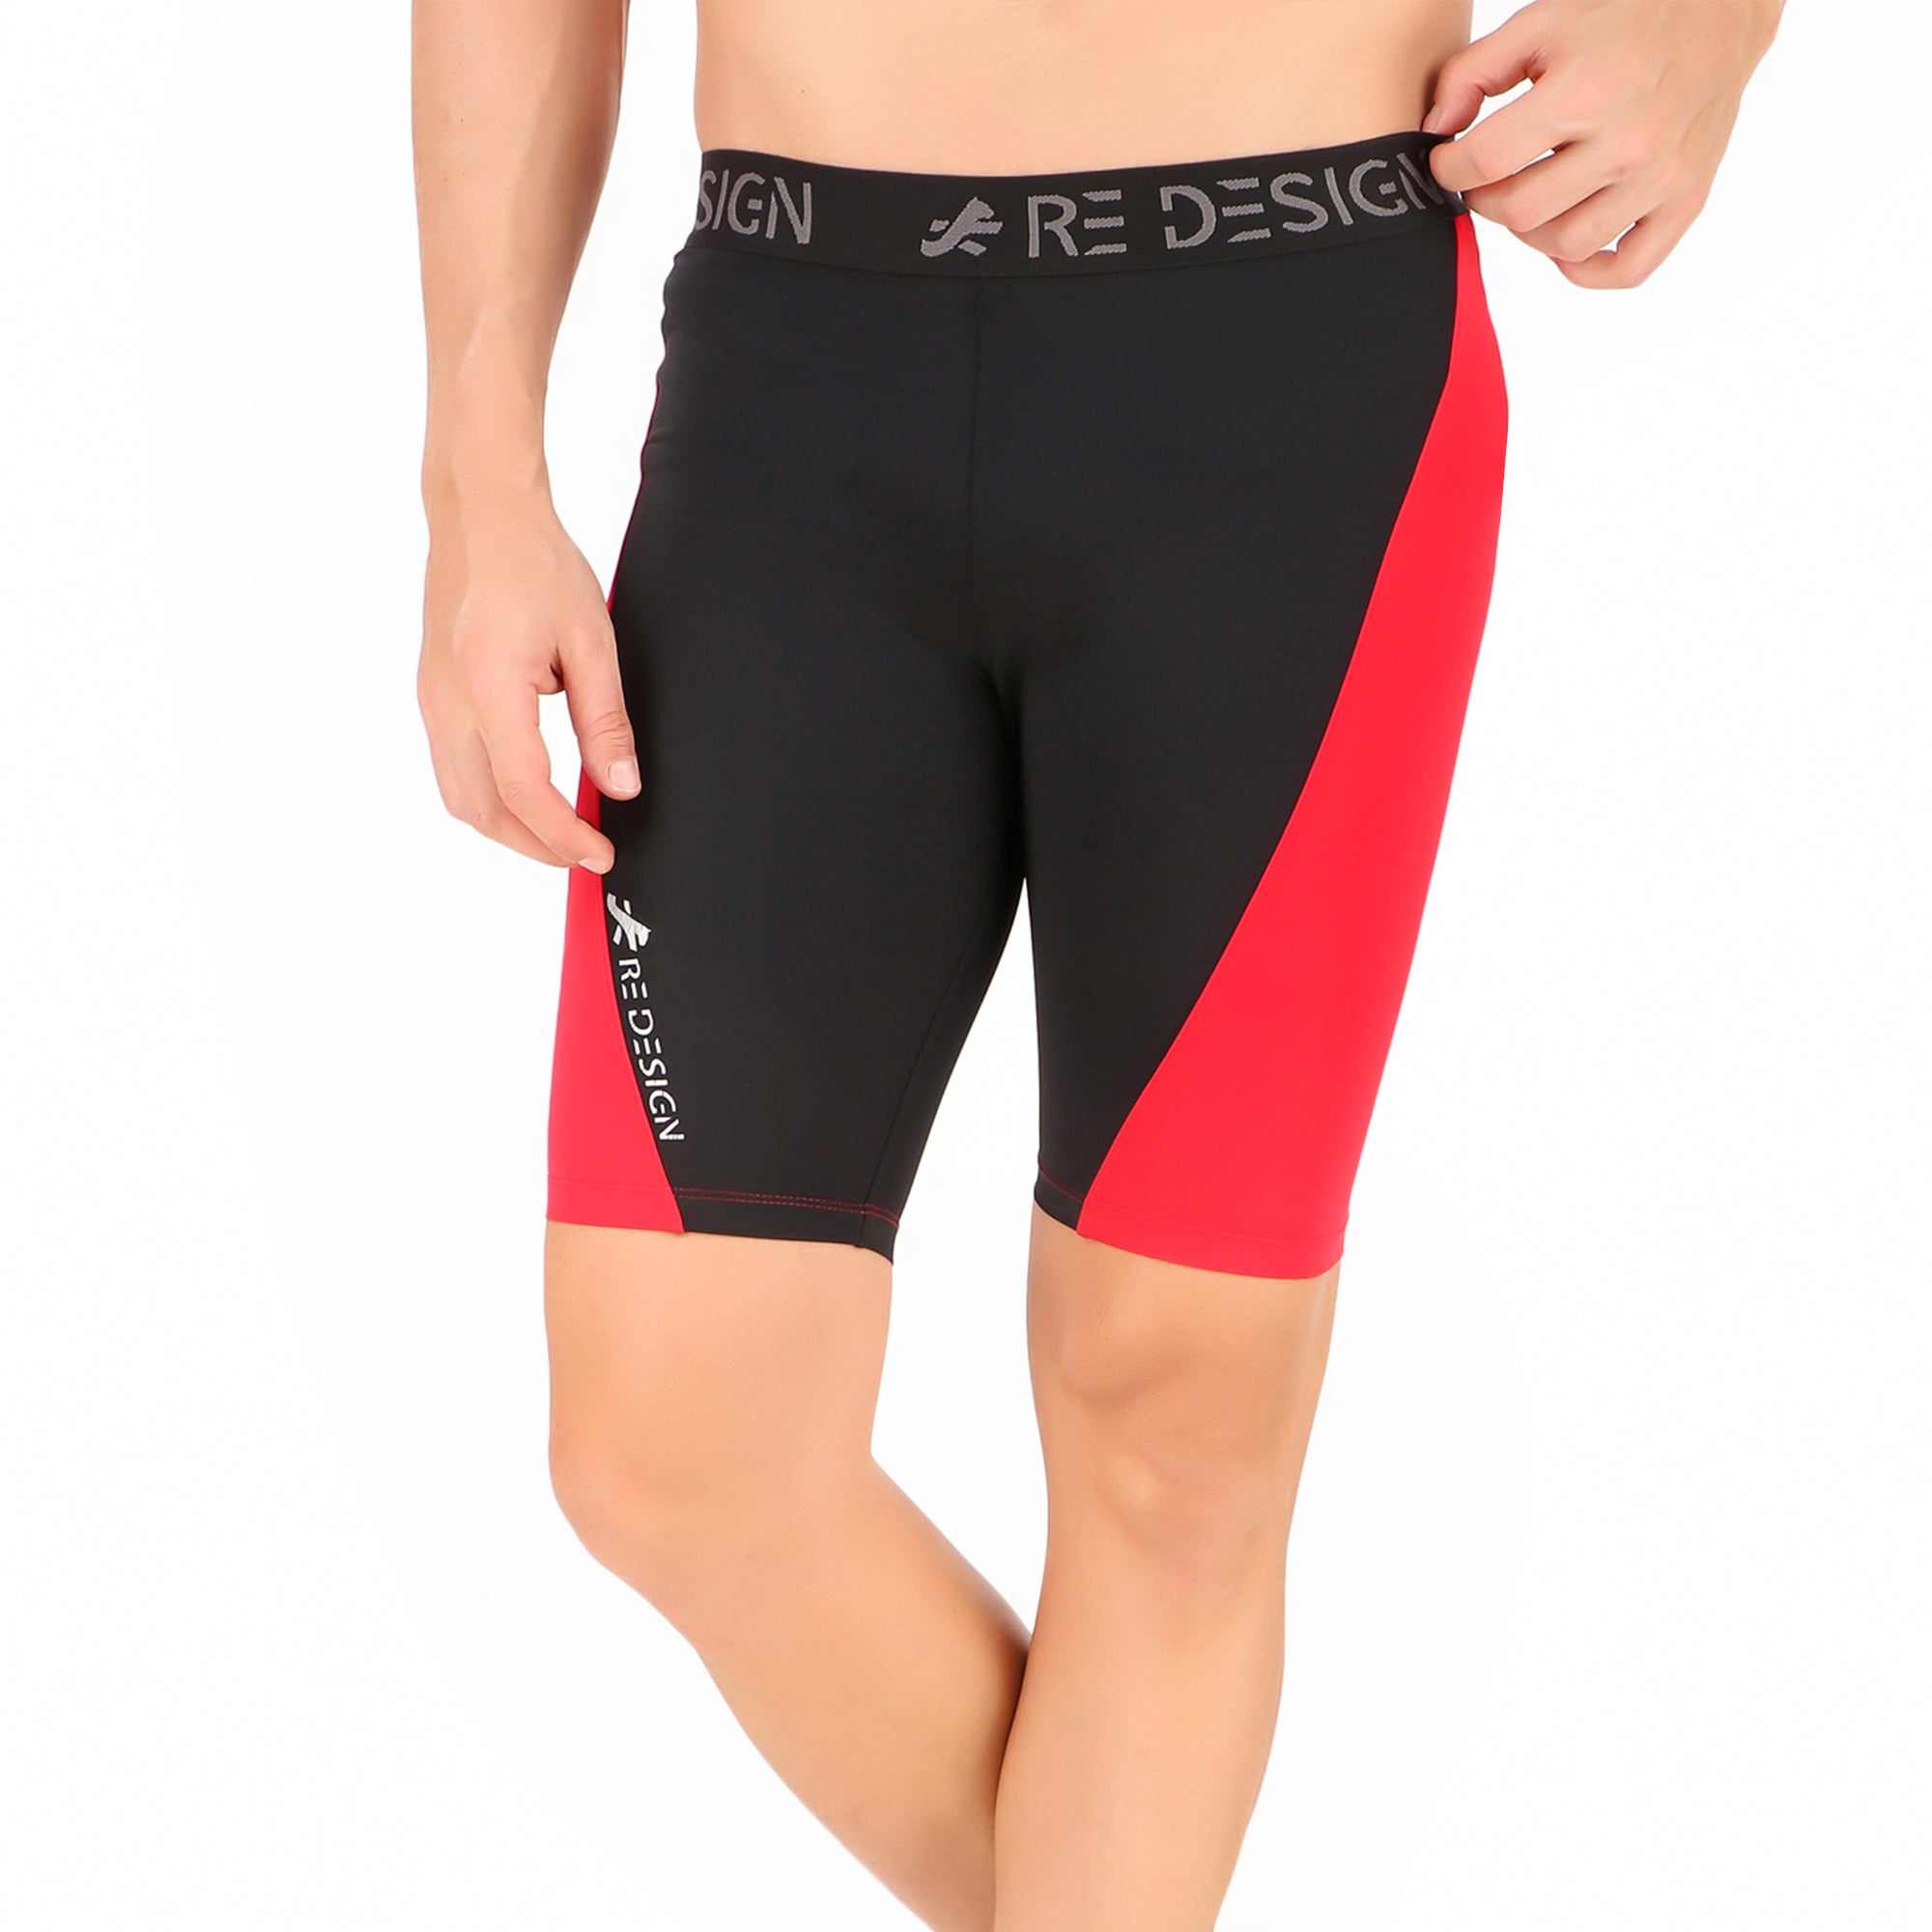 Nylon Compression Shorts and Half Tights For Men (BLACK/RED)